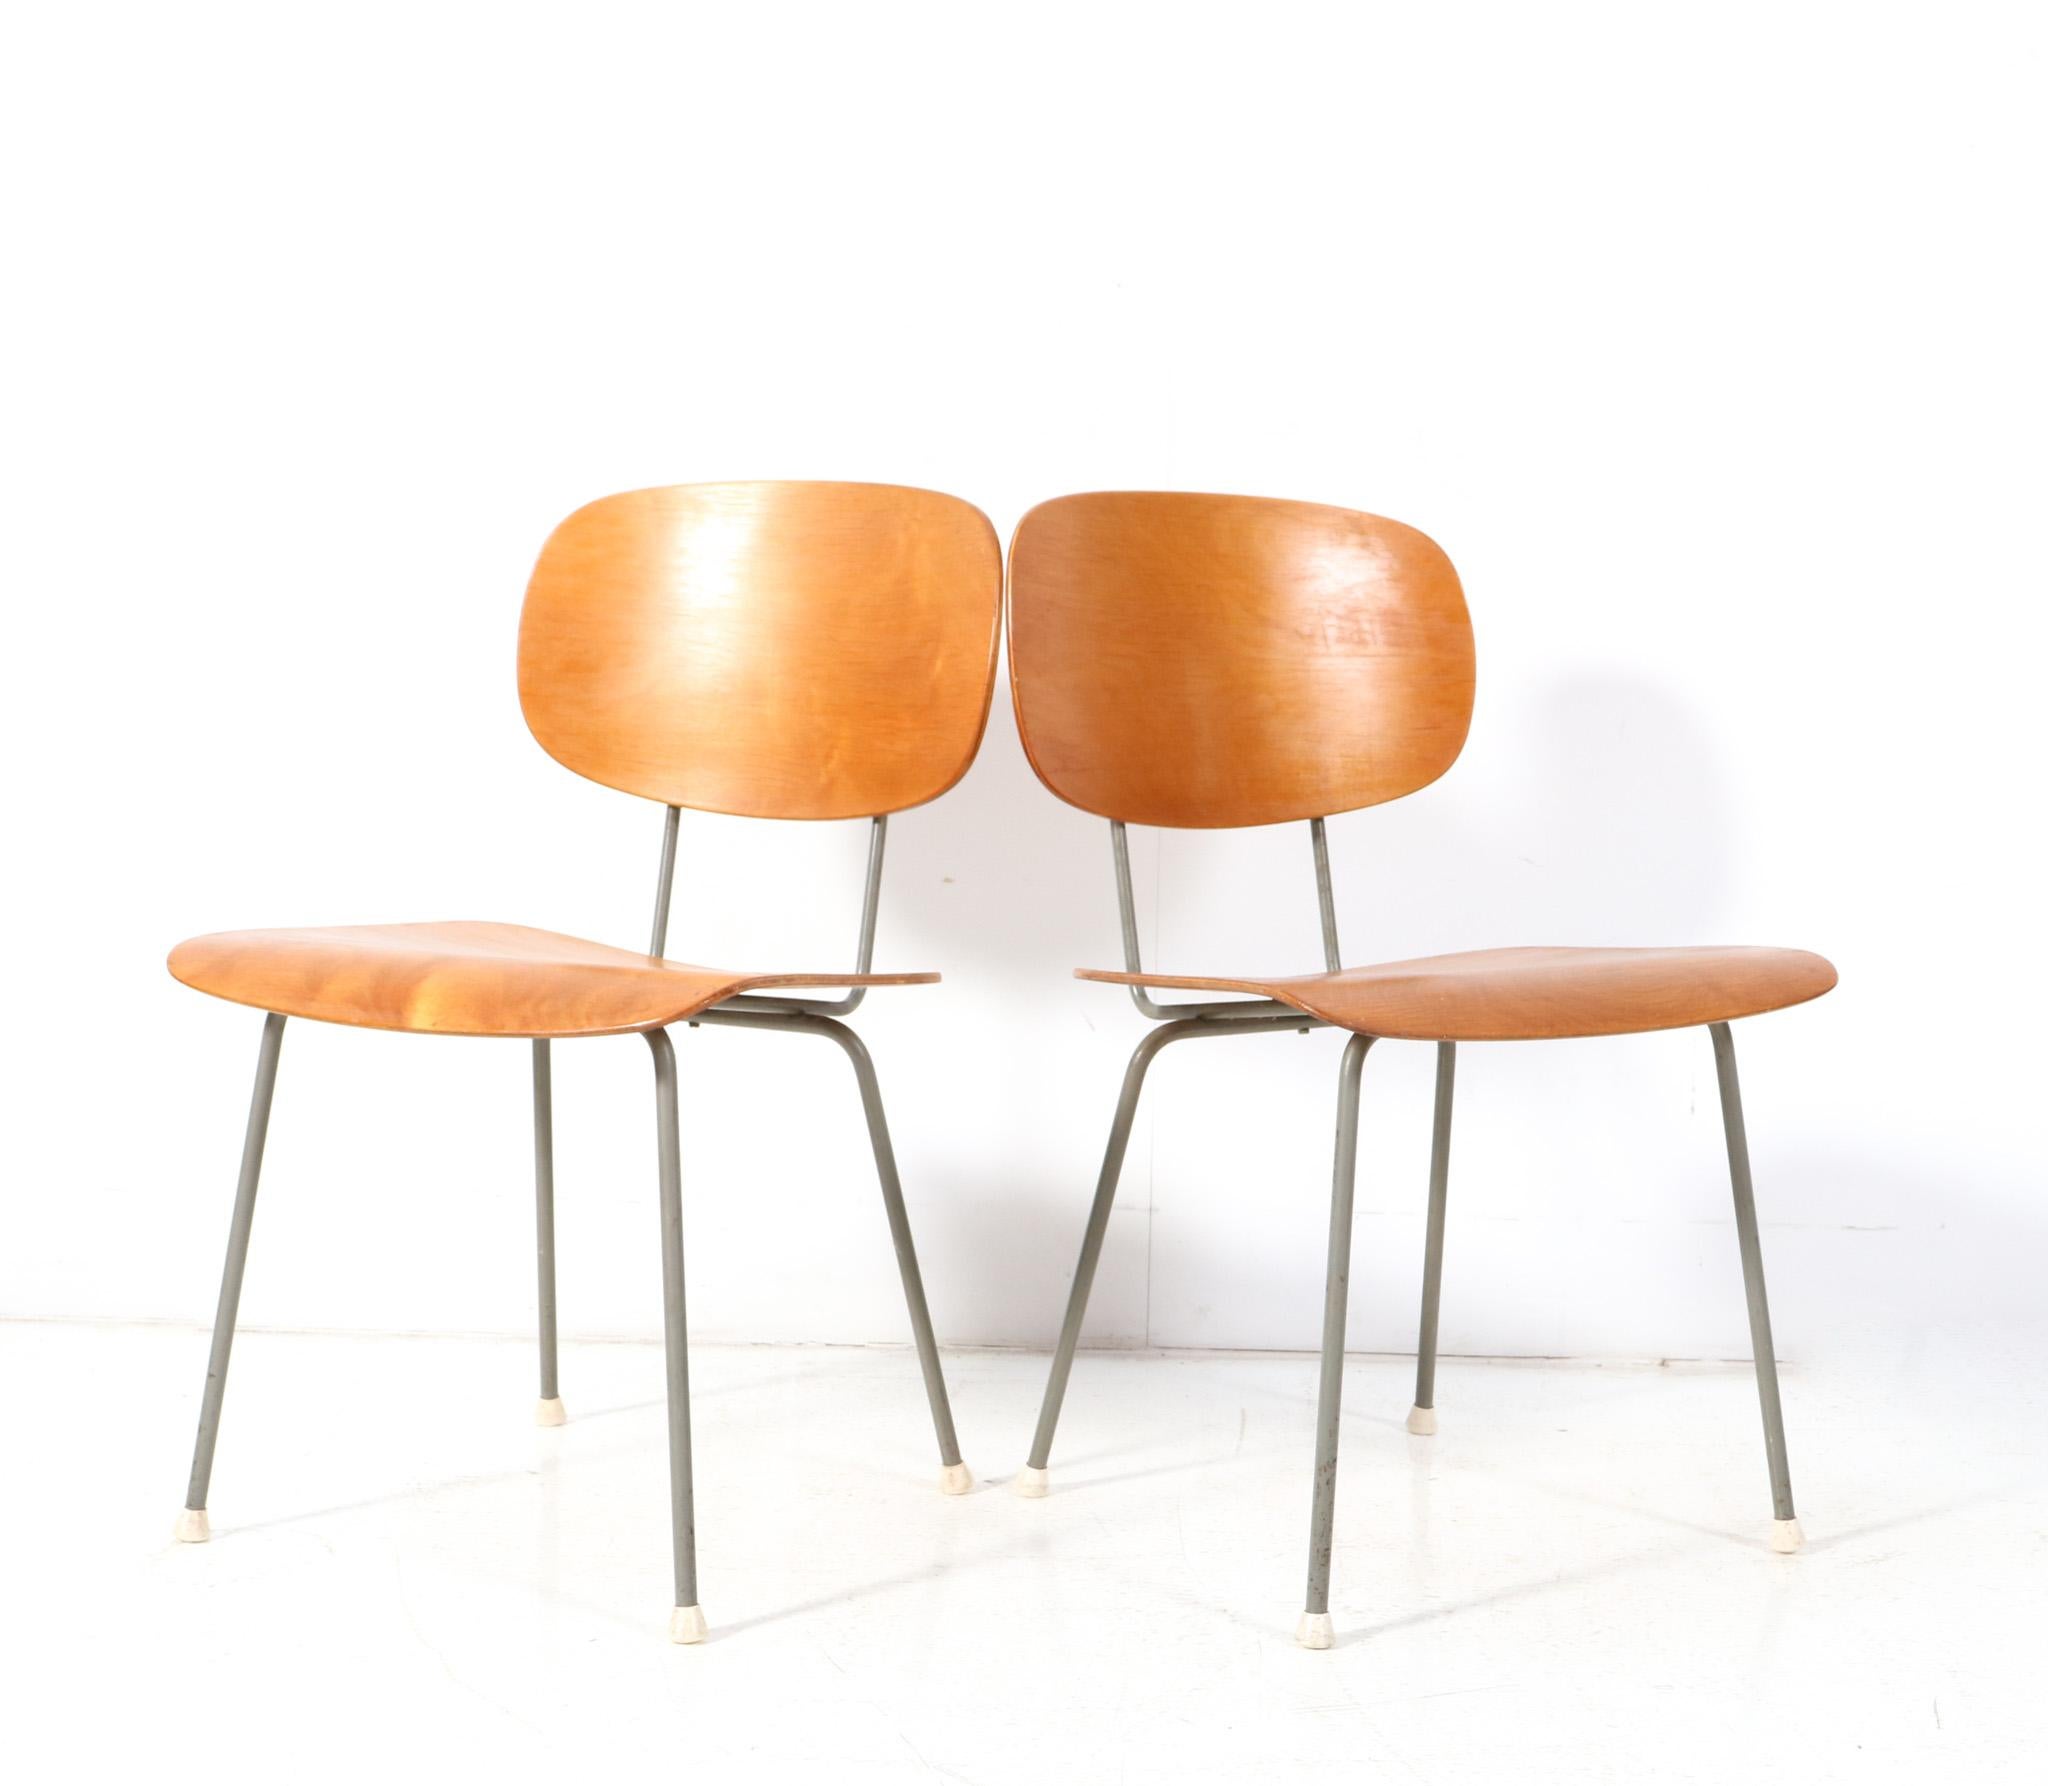 Mid-20th Century Pair of Mid-Century Modern Model 116 Side Chairs by Wim Rietveld for Gispen For Sale